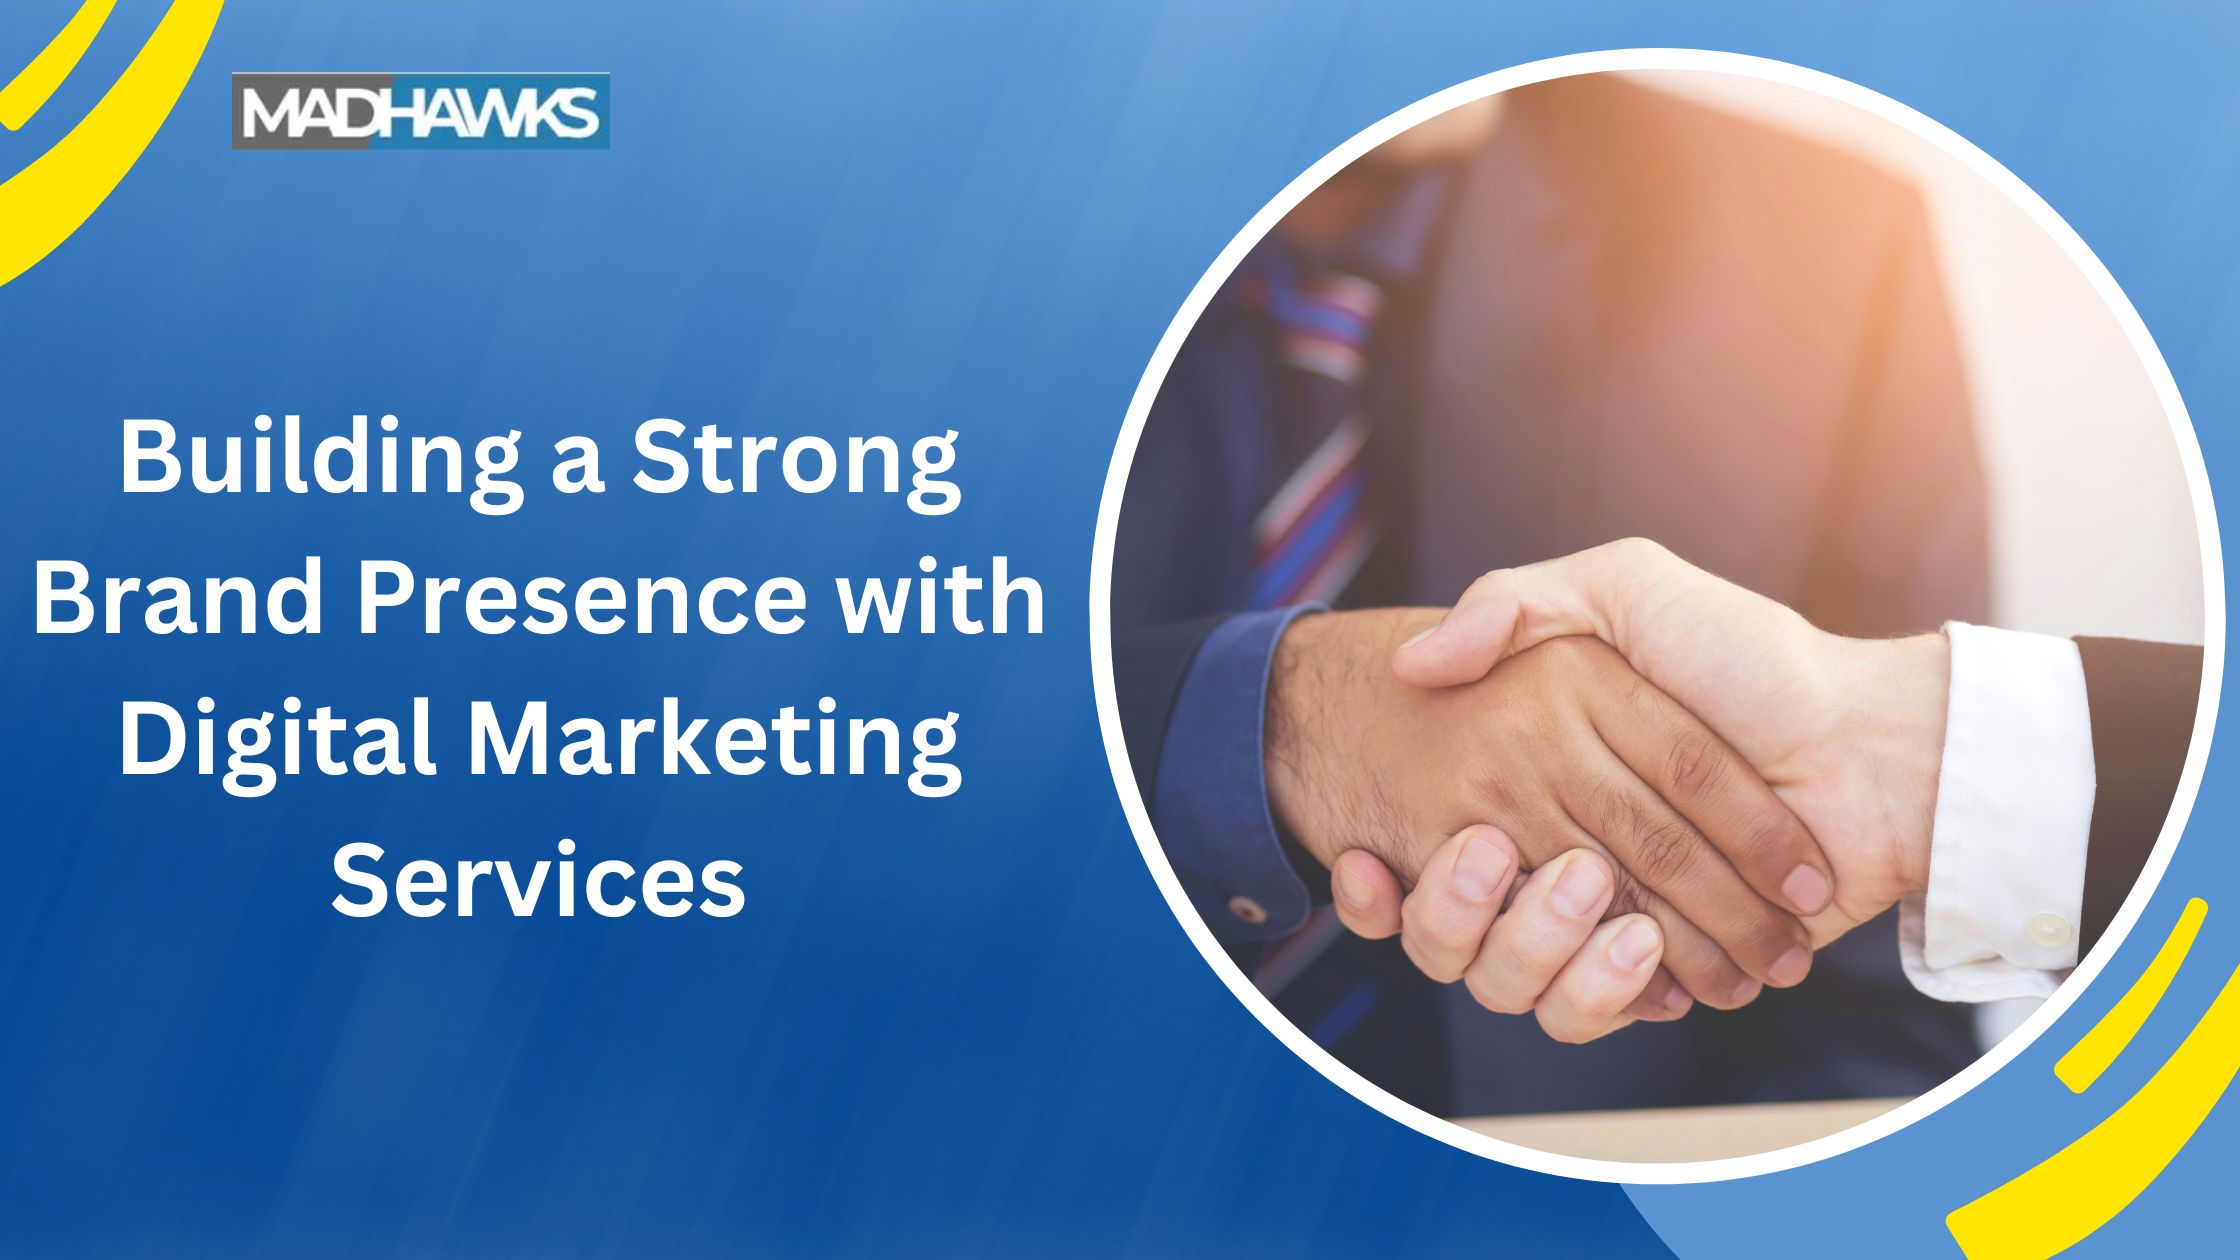 Building a Strong Brand Presence with Digital Marketing Services